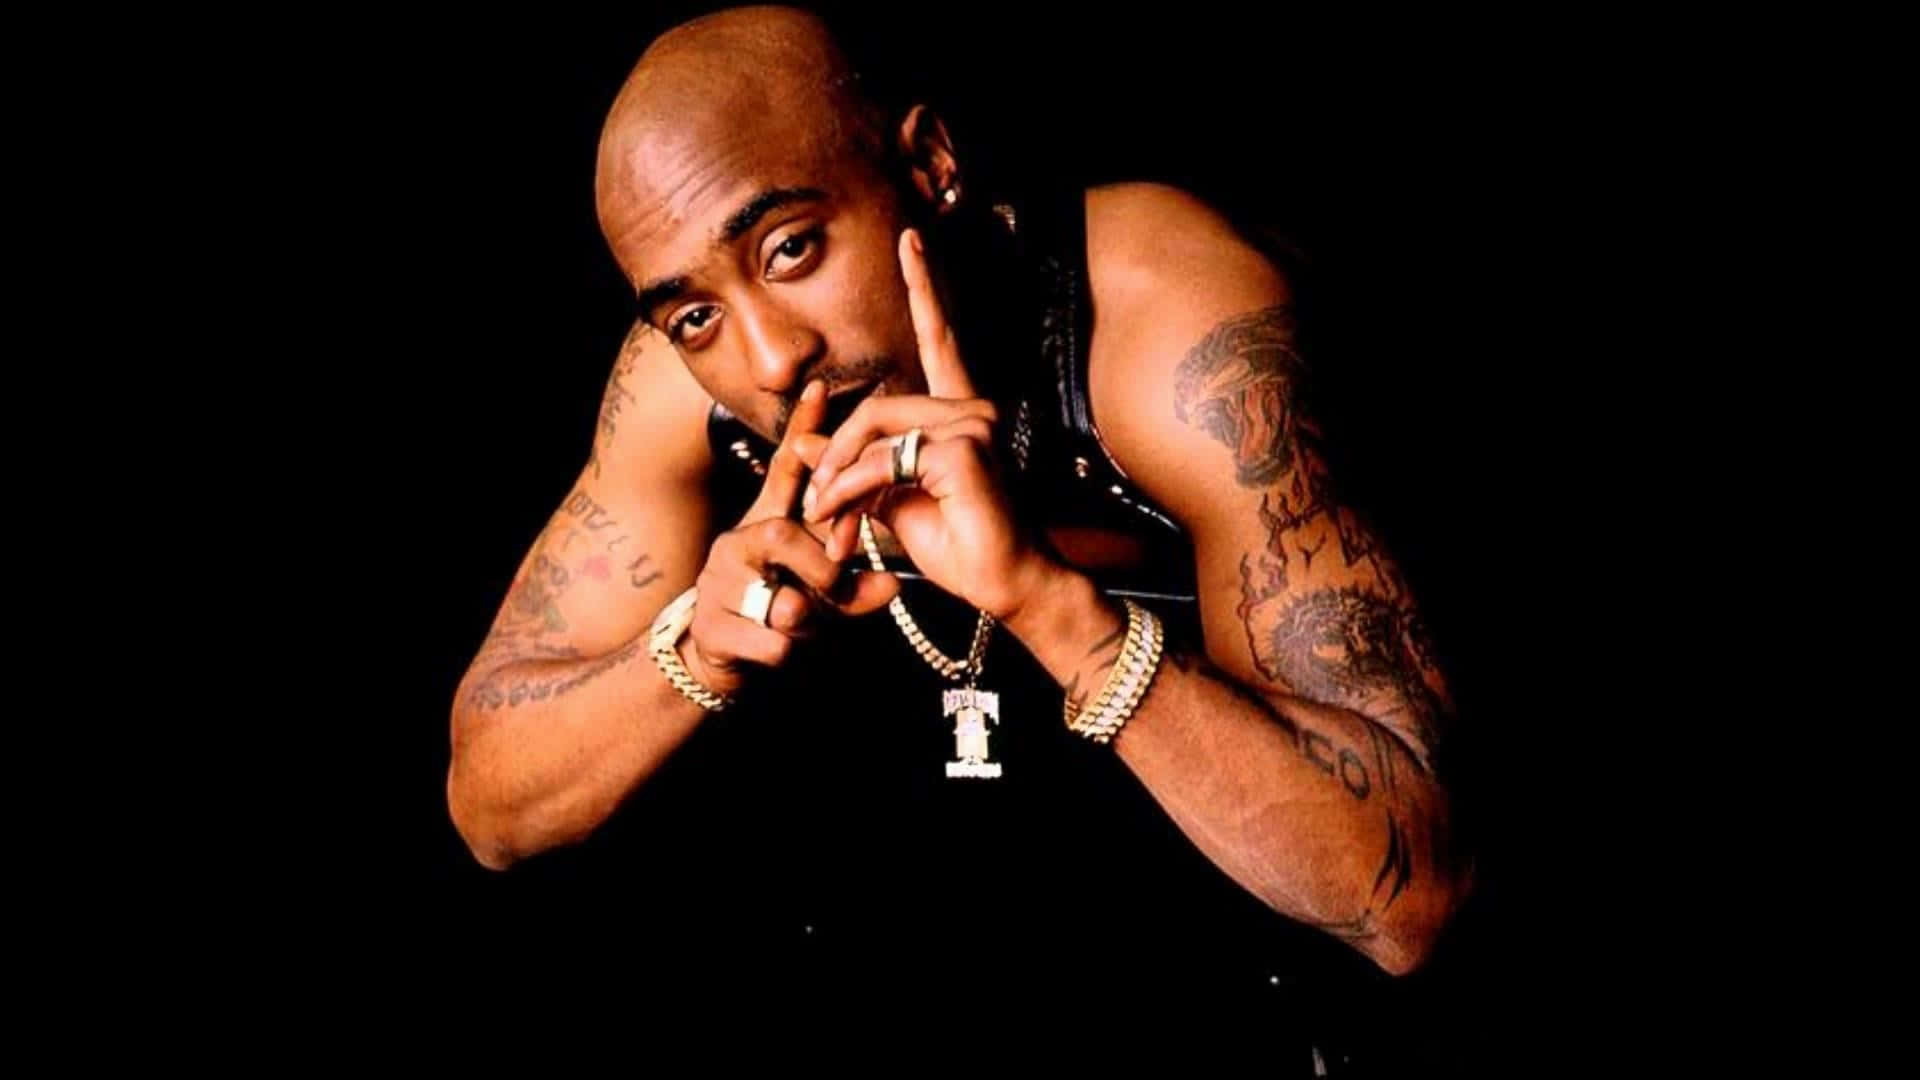 Legendary Rapper 2Pac in a thoughtful moment.